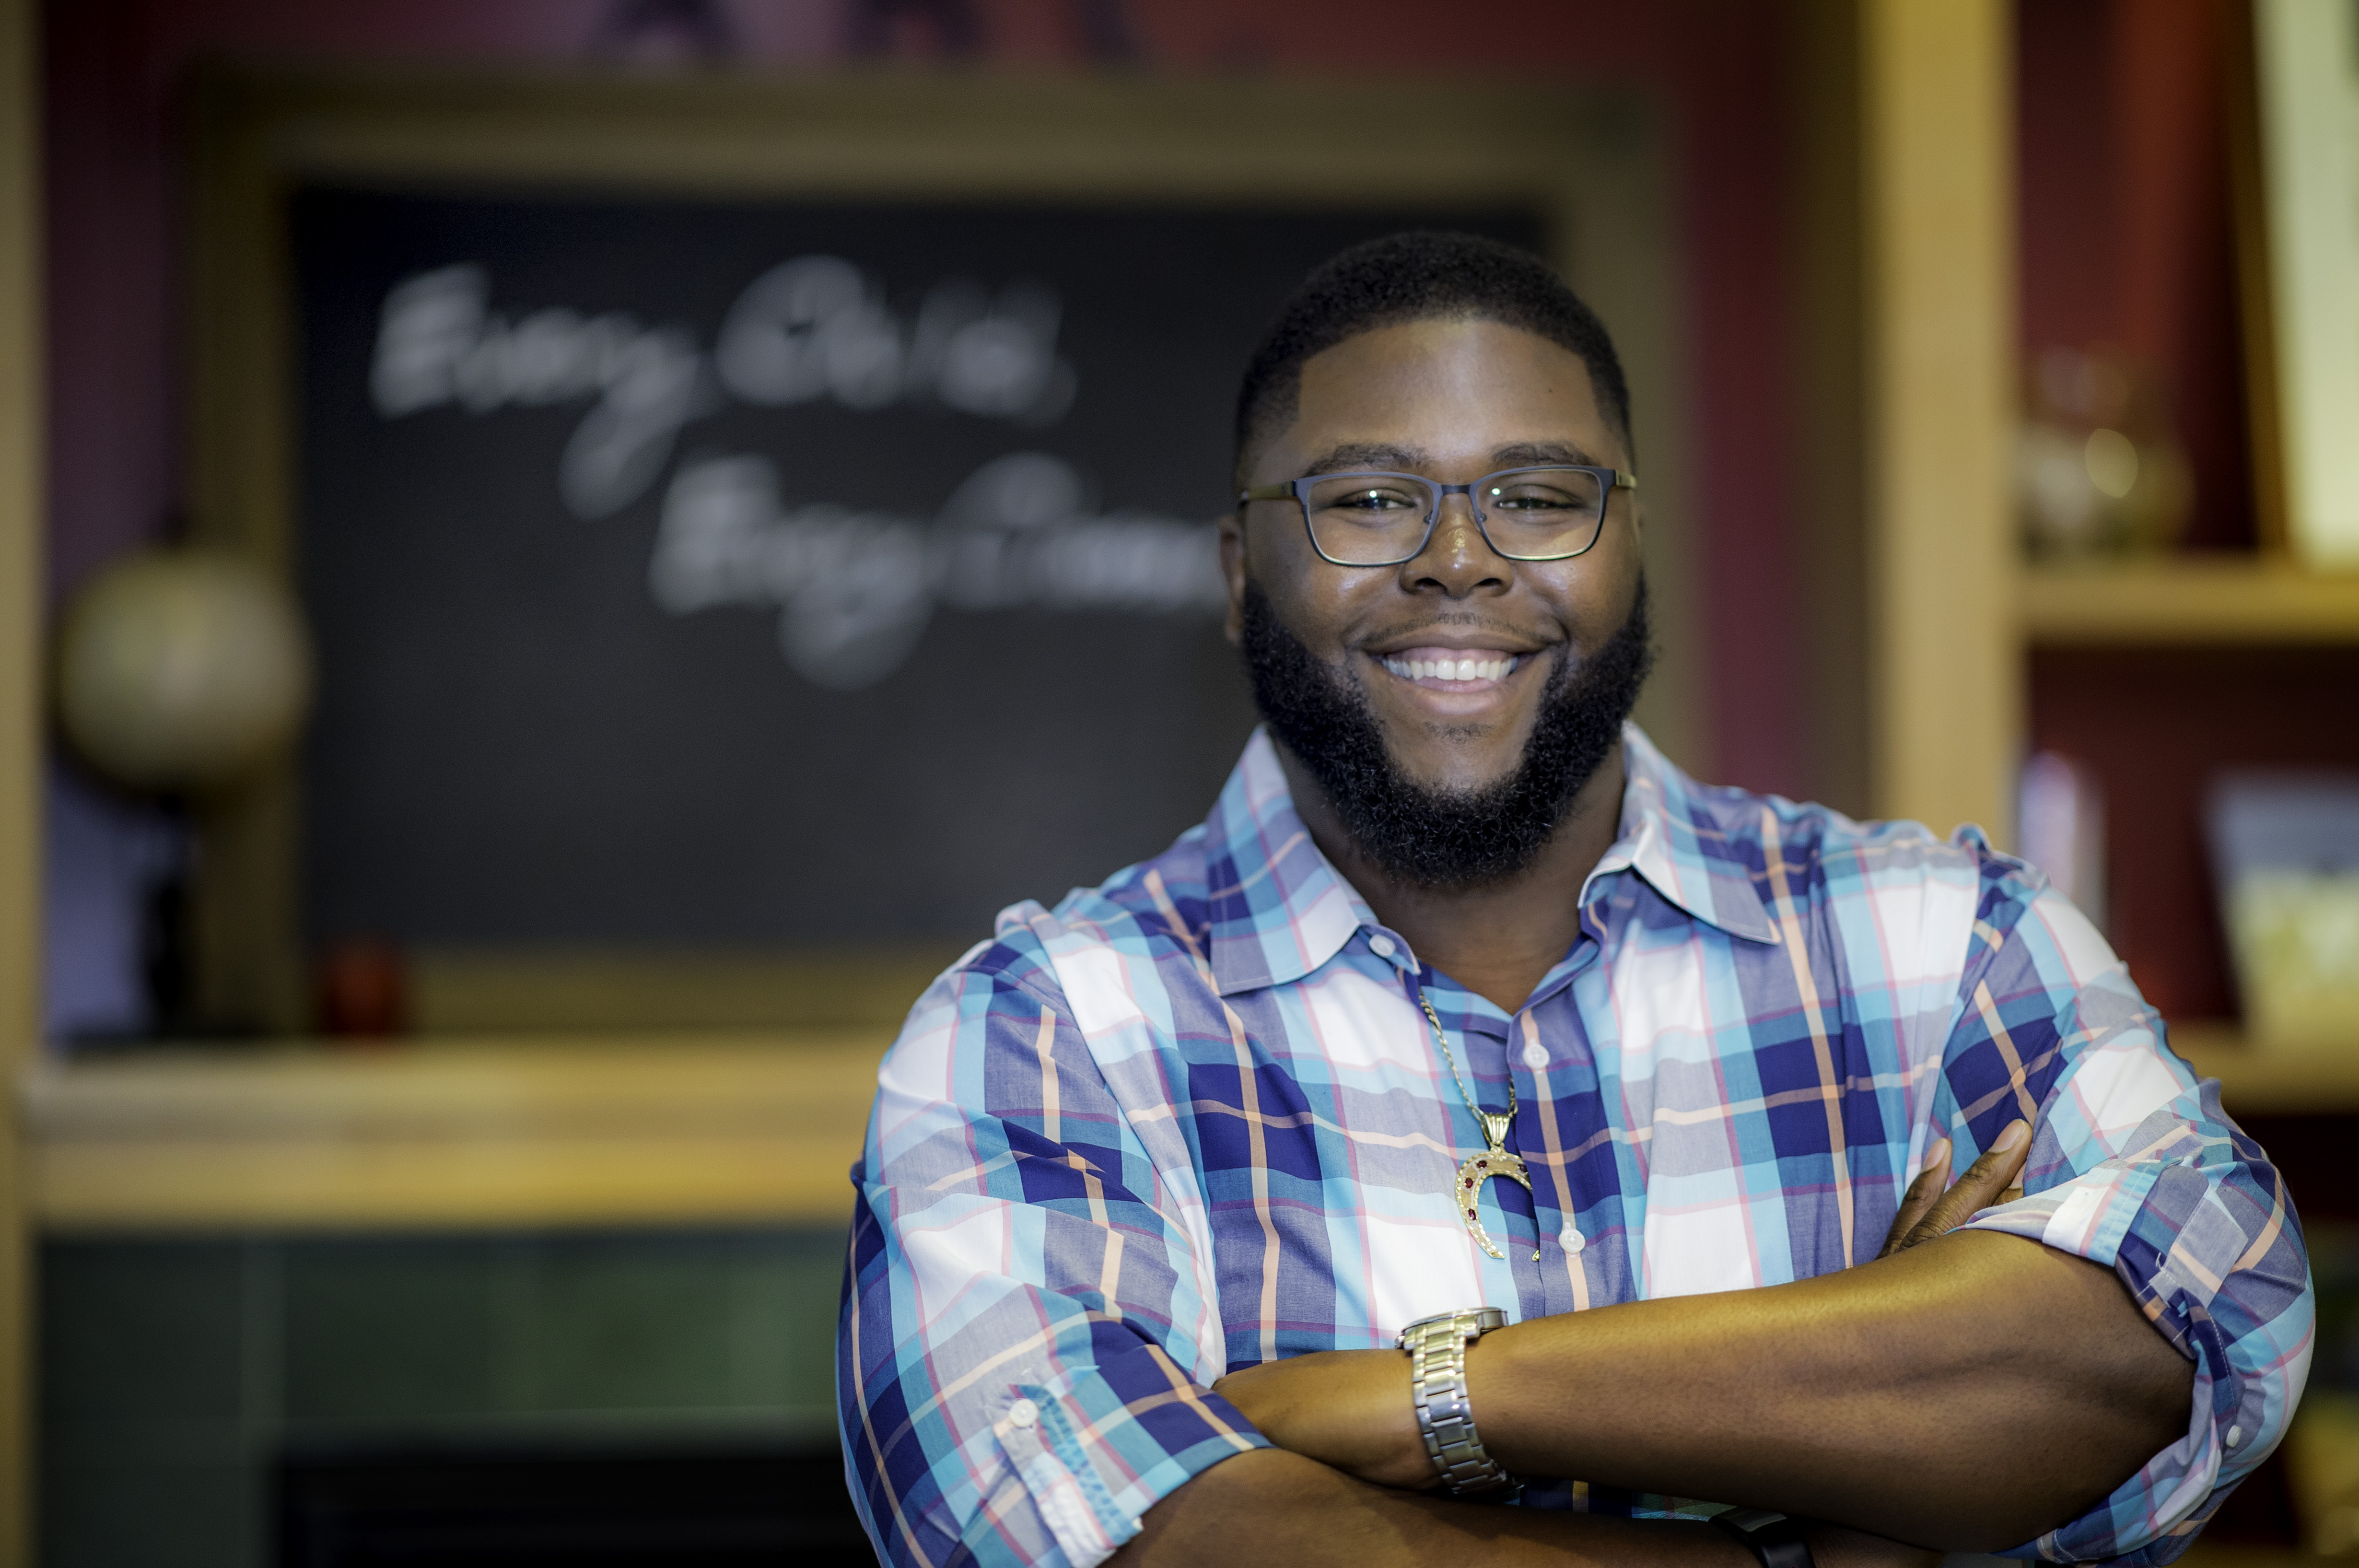 Anthony Jack smiles with crossed arms in front of an out-of-focus chalkboard.